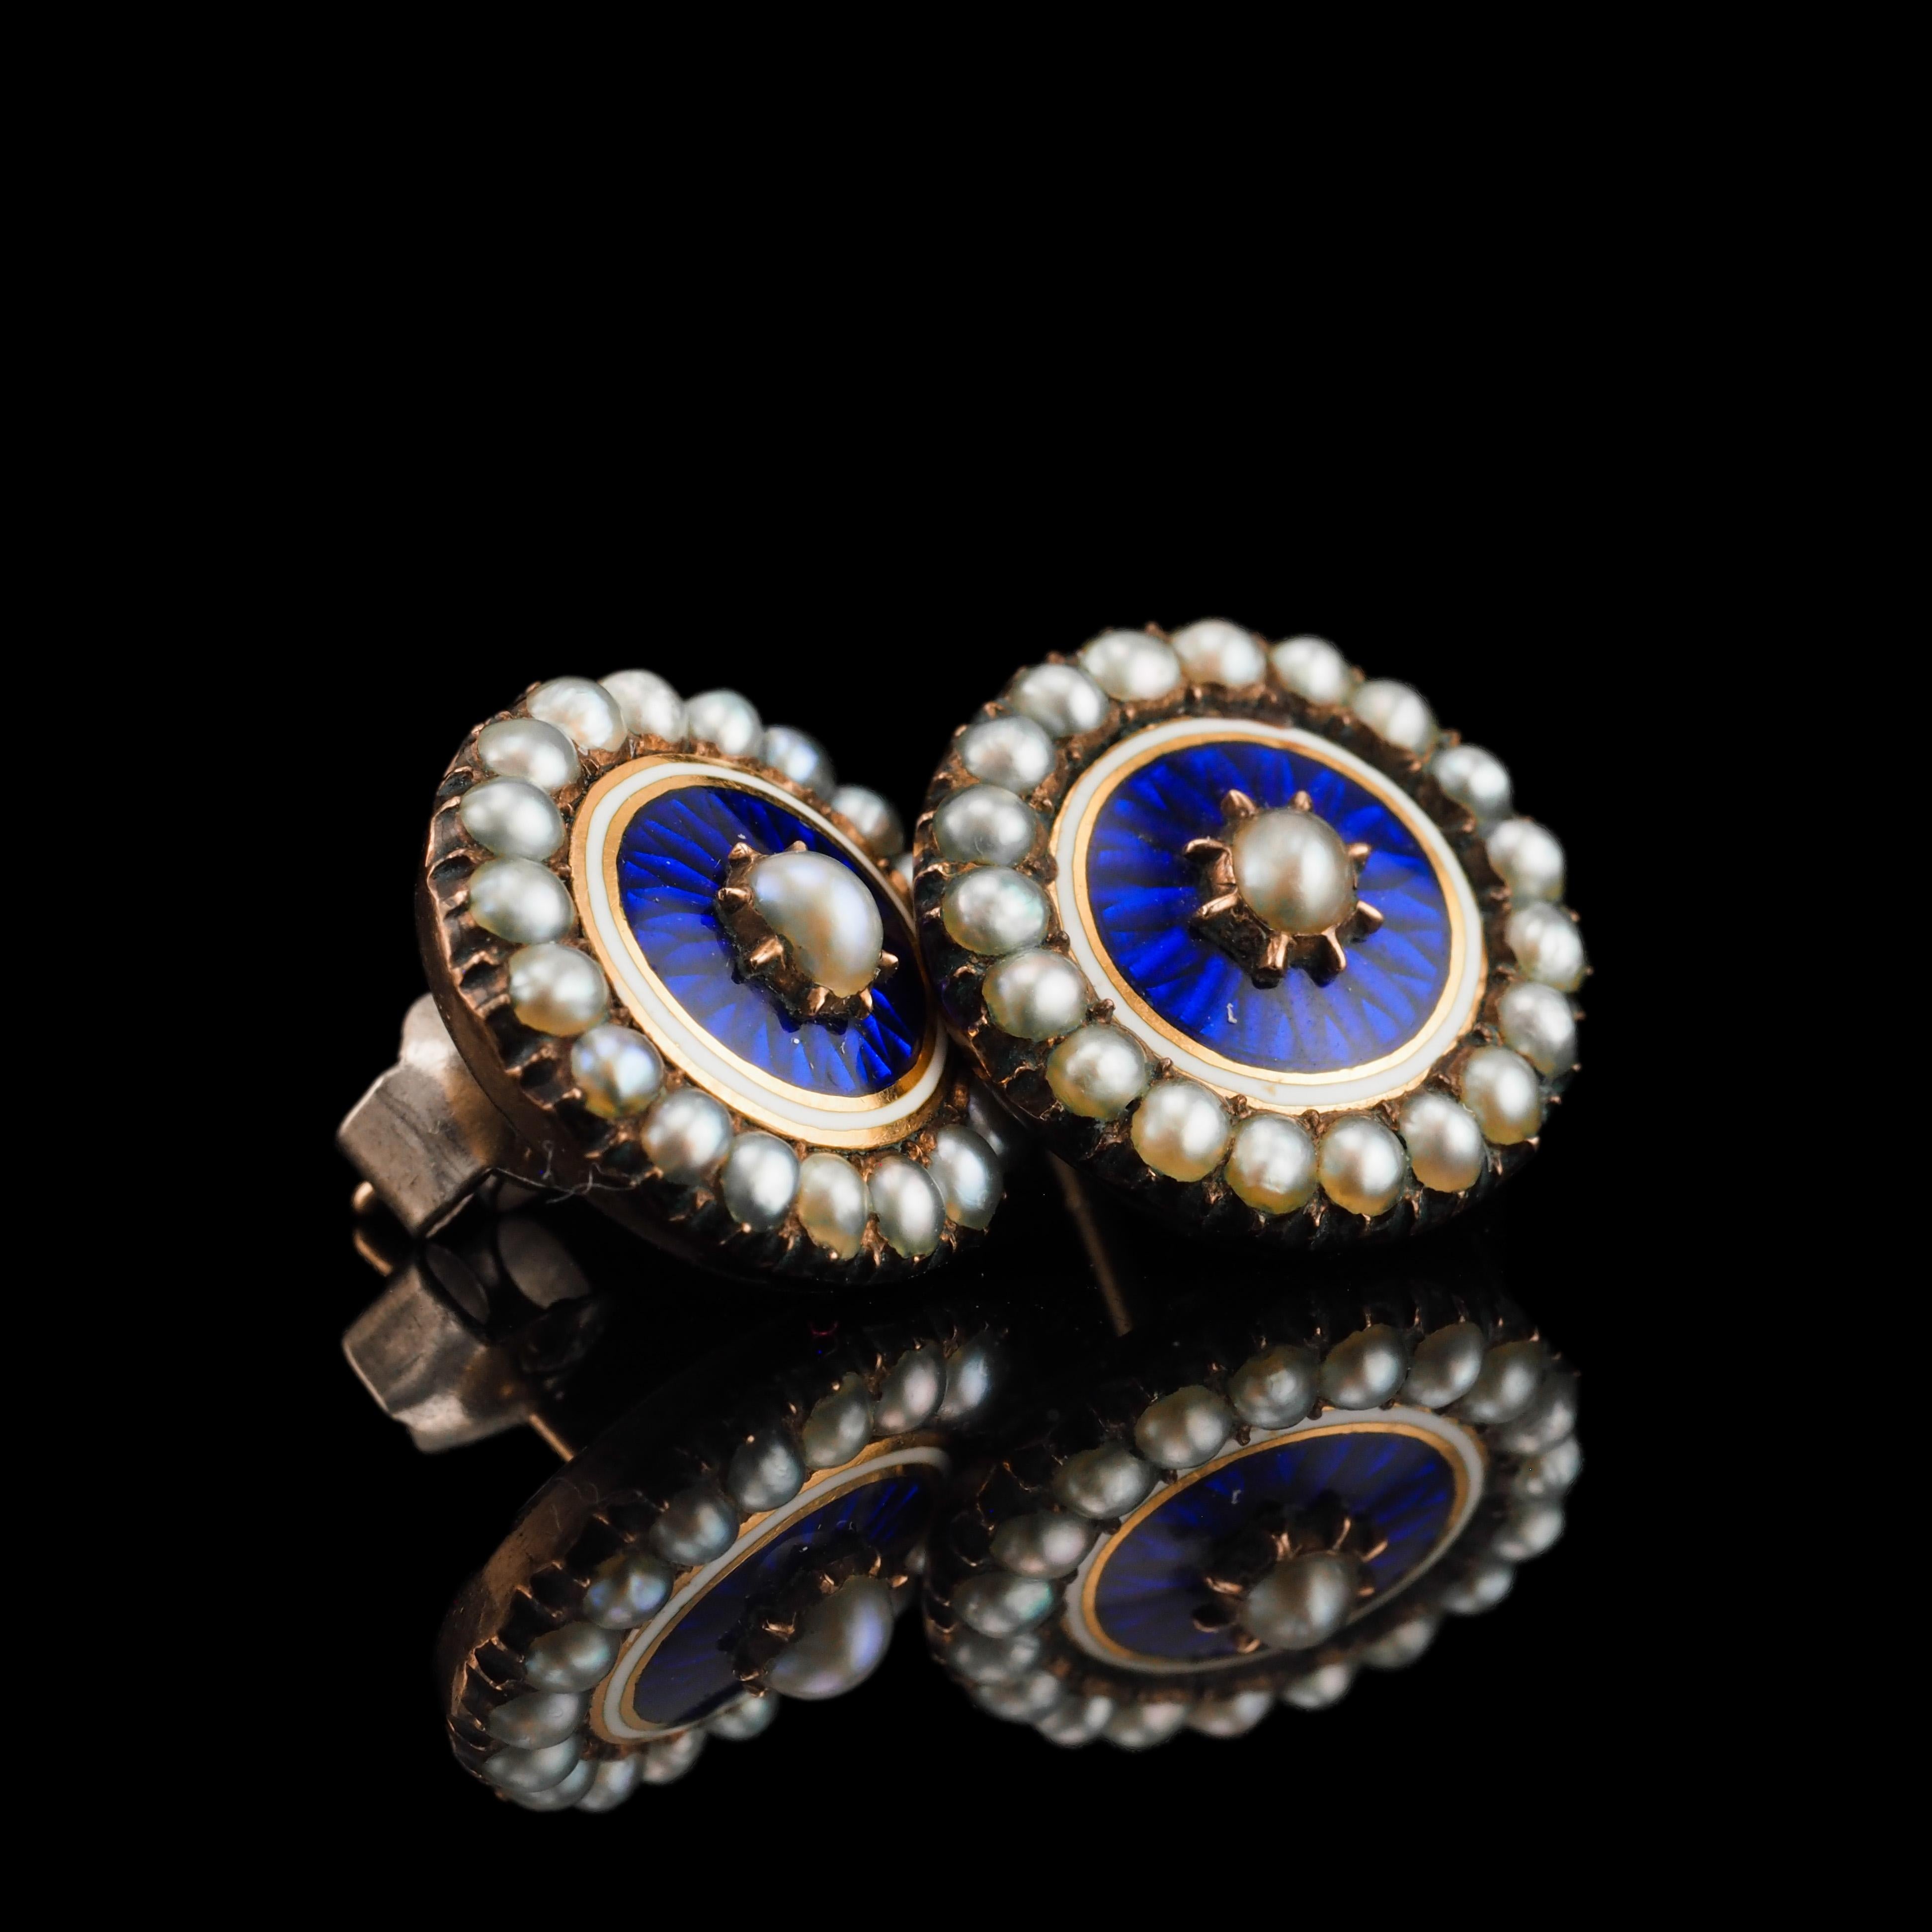 Antique Georgian Gold Earrings with Blue Enamel Guilloche Pearl Cluster c.1800 For Sale 2